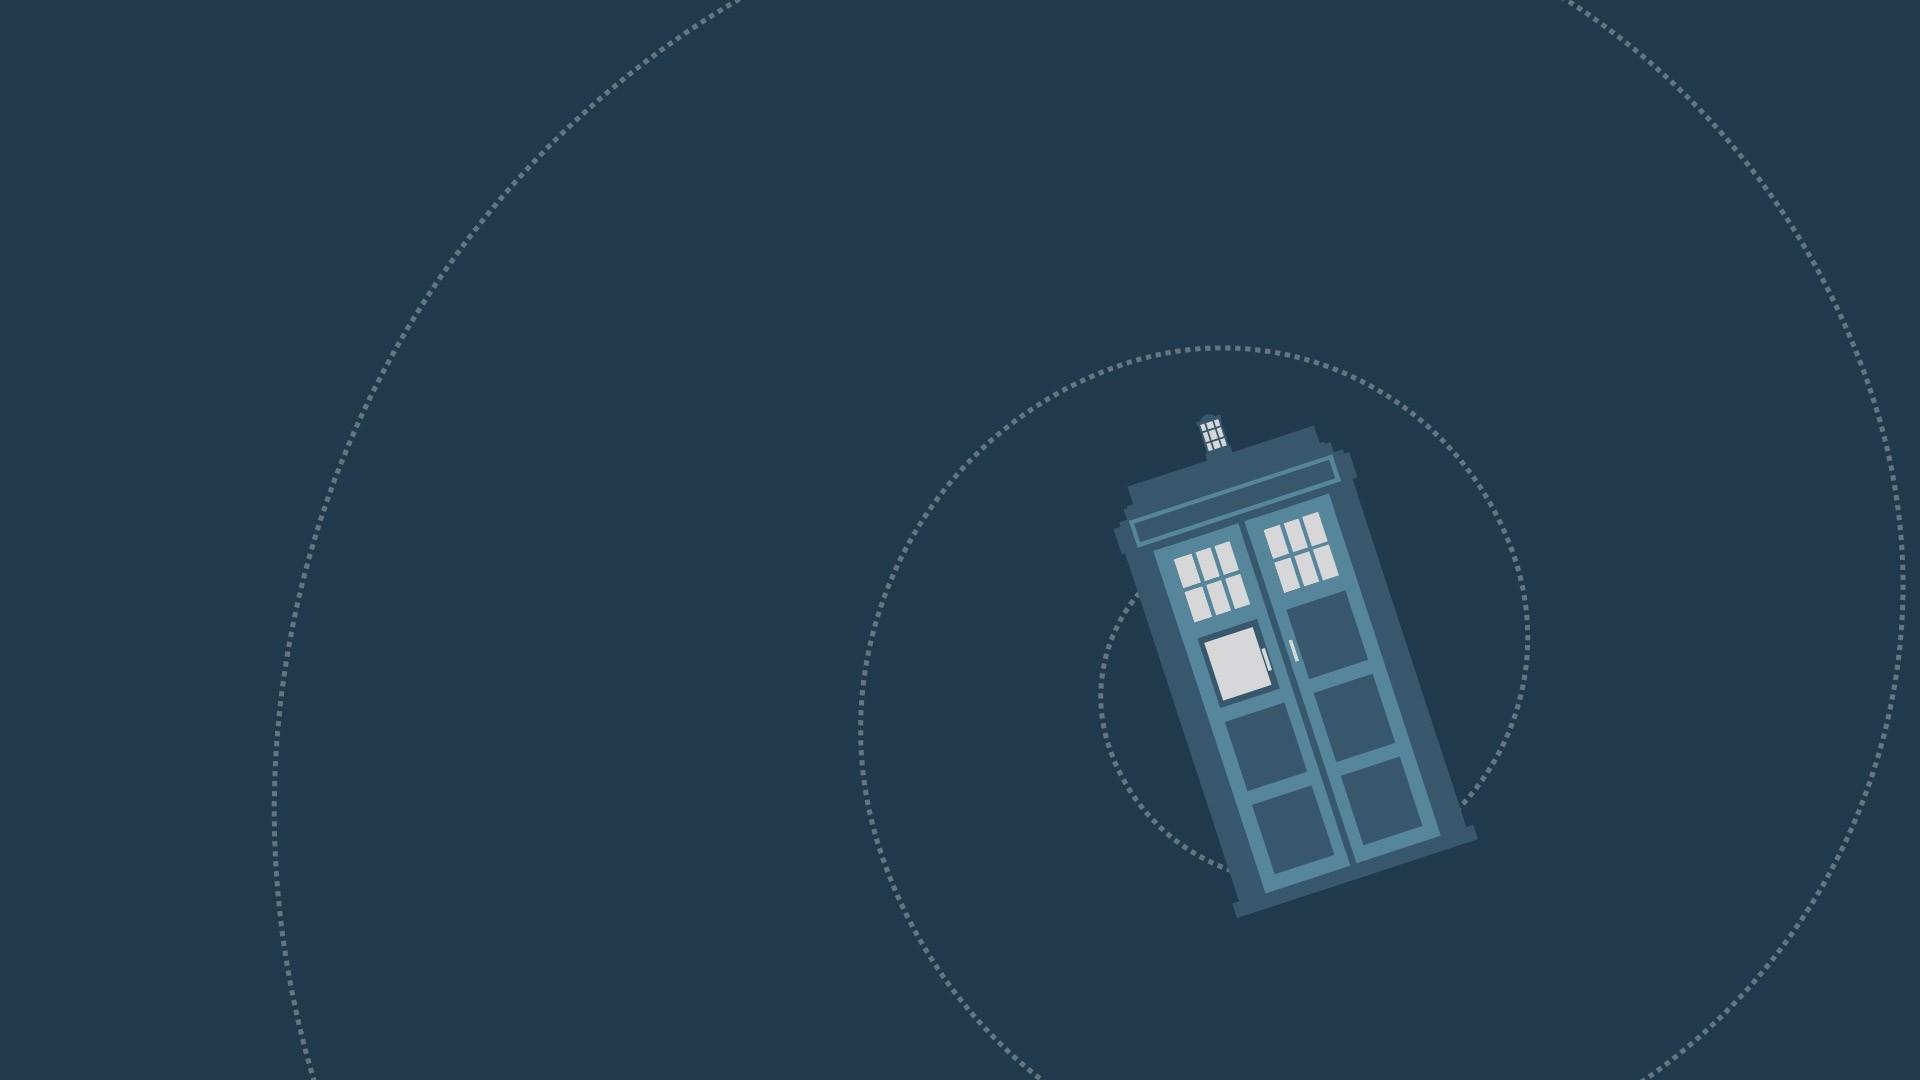 Doctor Who, TARDIS Wallpaper HD / Desktop and Mobile Background